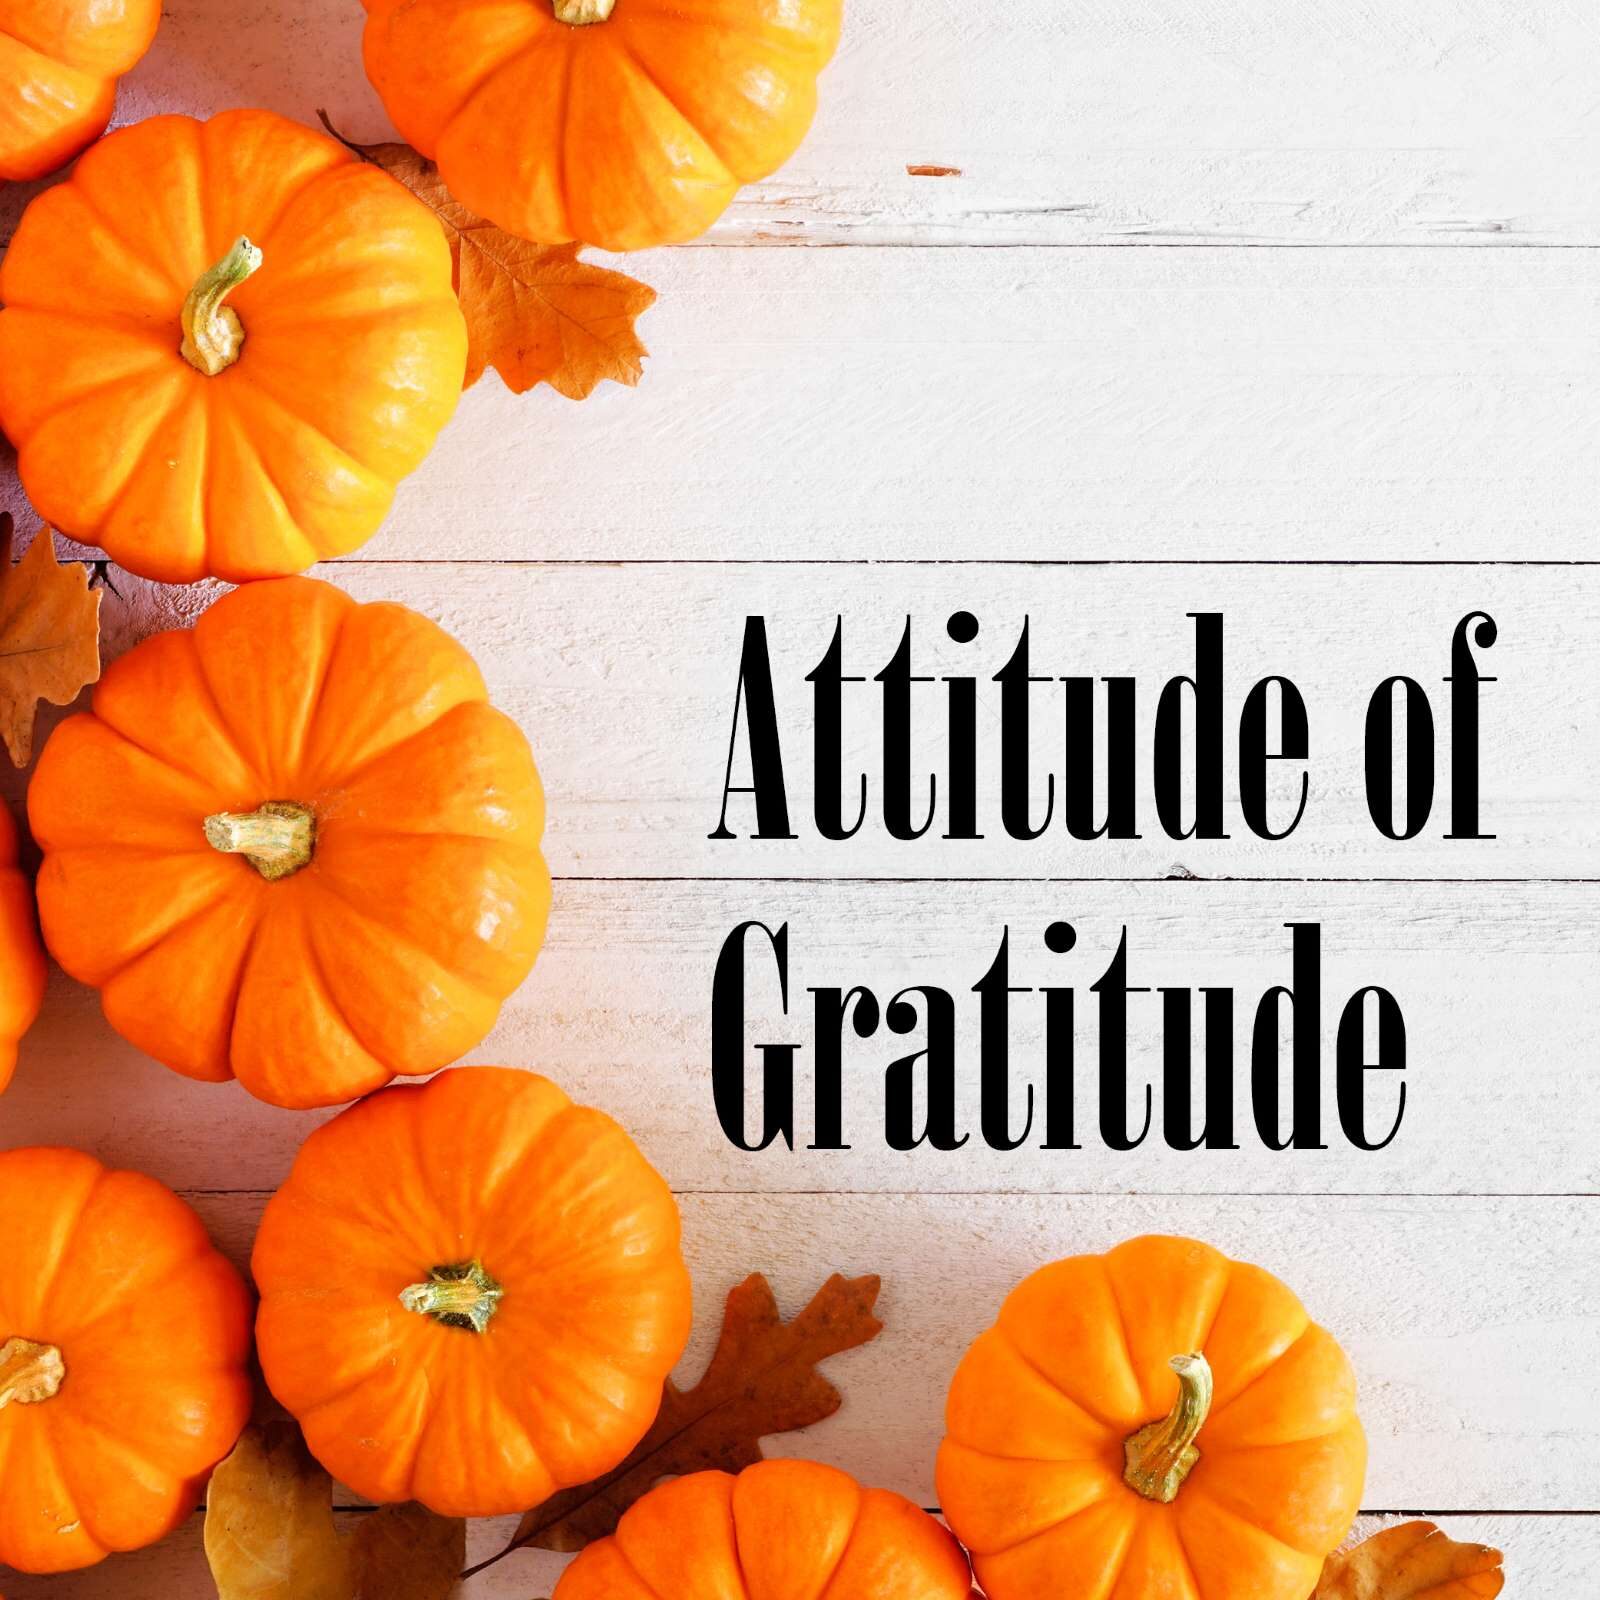 Attitude of Gratitude Photo Contest – What is Happiness?